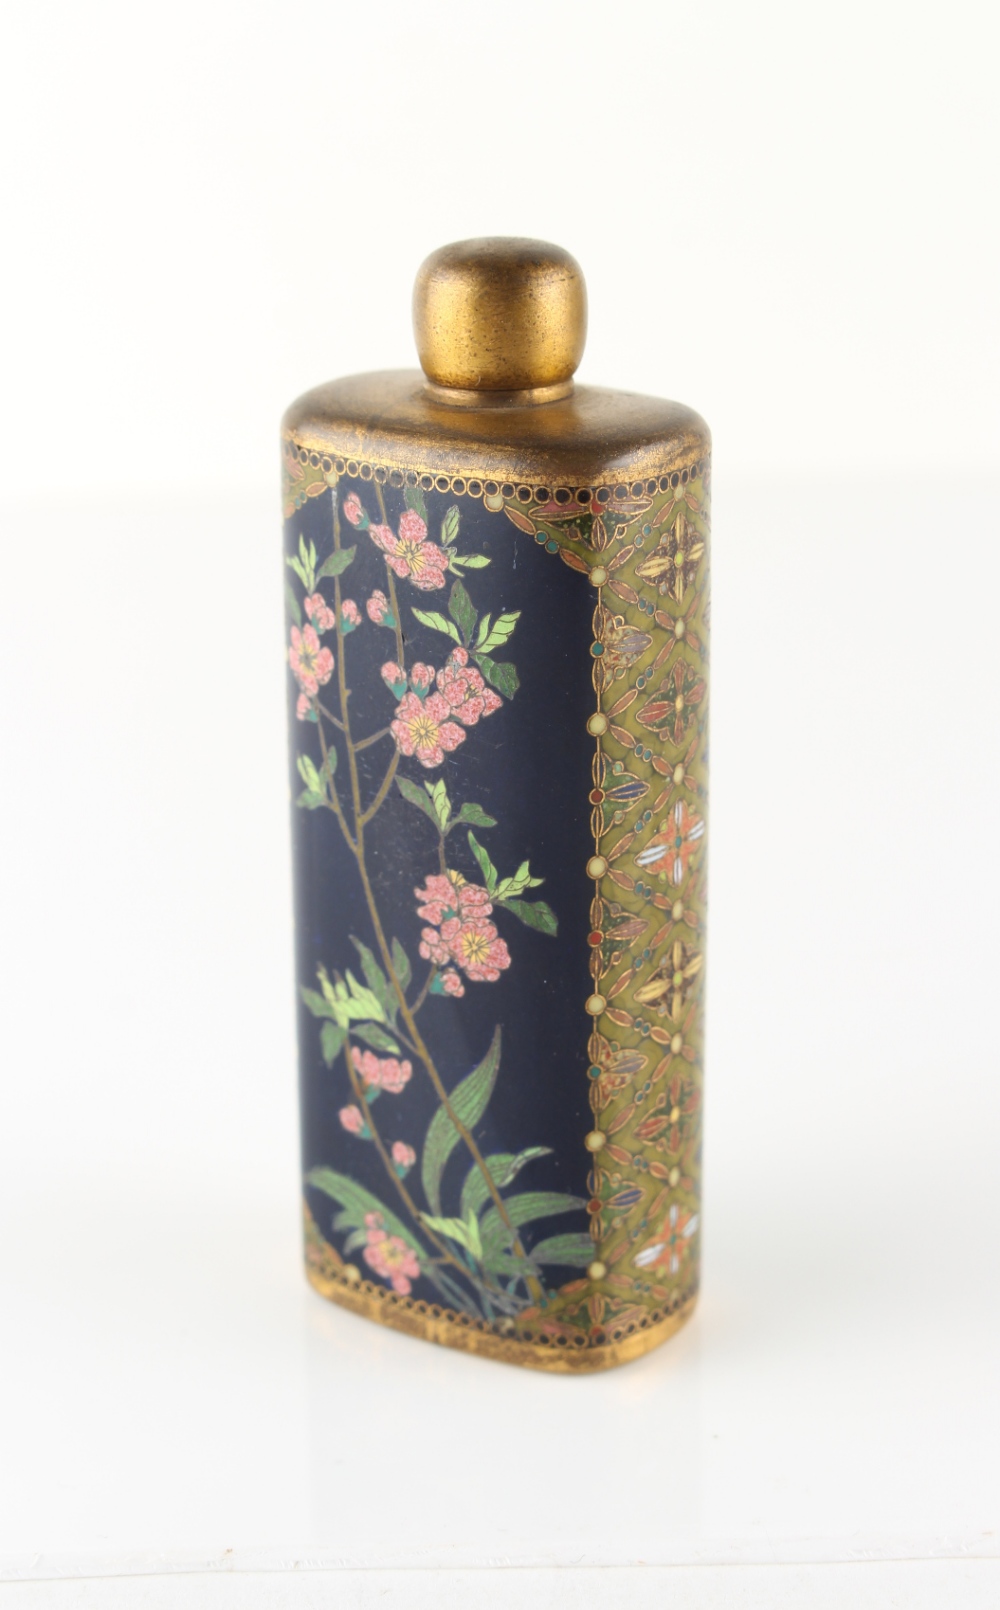 Property of a lady - a fine Japanese Meiji period signed cloisonne scent bottle by the workshop of - Image 2 of 3